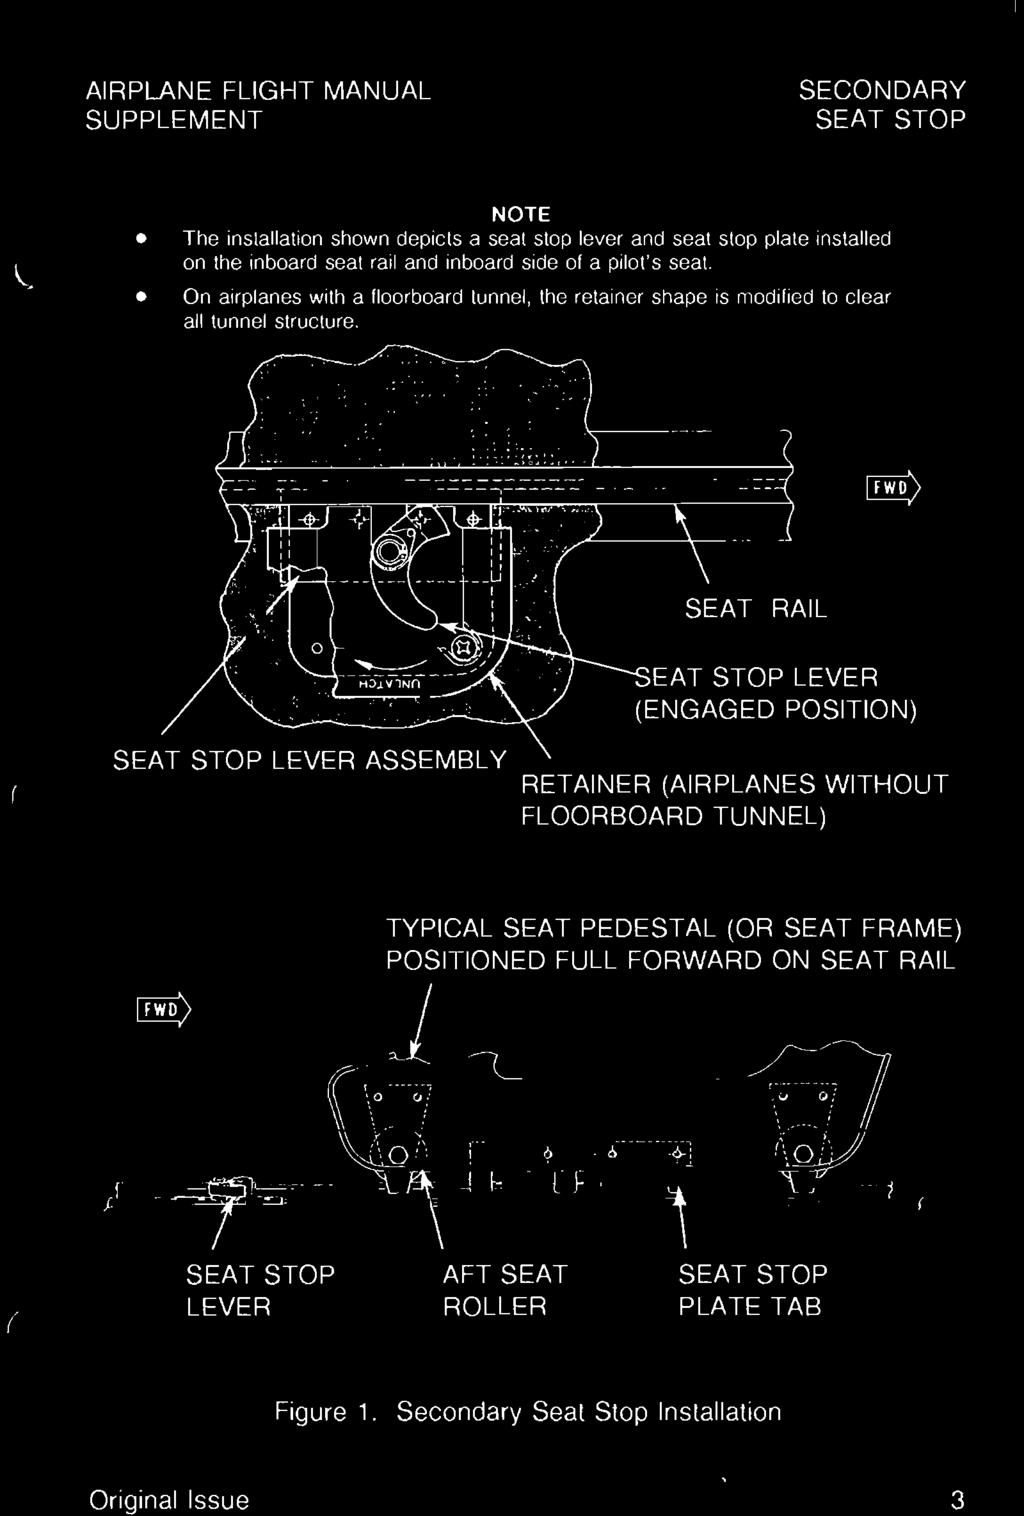 AIRPLANE FLIGHT MANUAL SUPPLEMENT SECONDARY SEAT STOP NOTE The installation shown depicts a seat stop lever and seat stop plate installed on the inboard seat rail and inboard side of a pilot's seat.